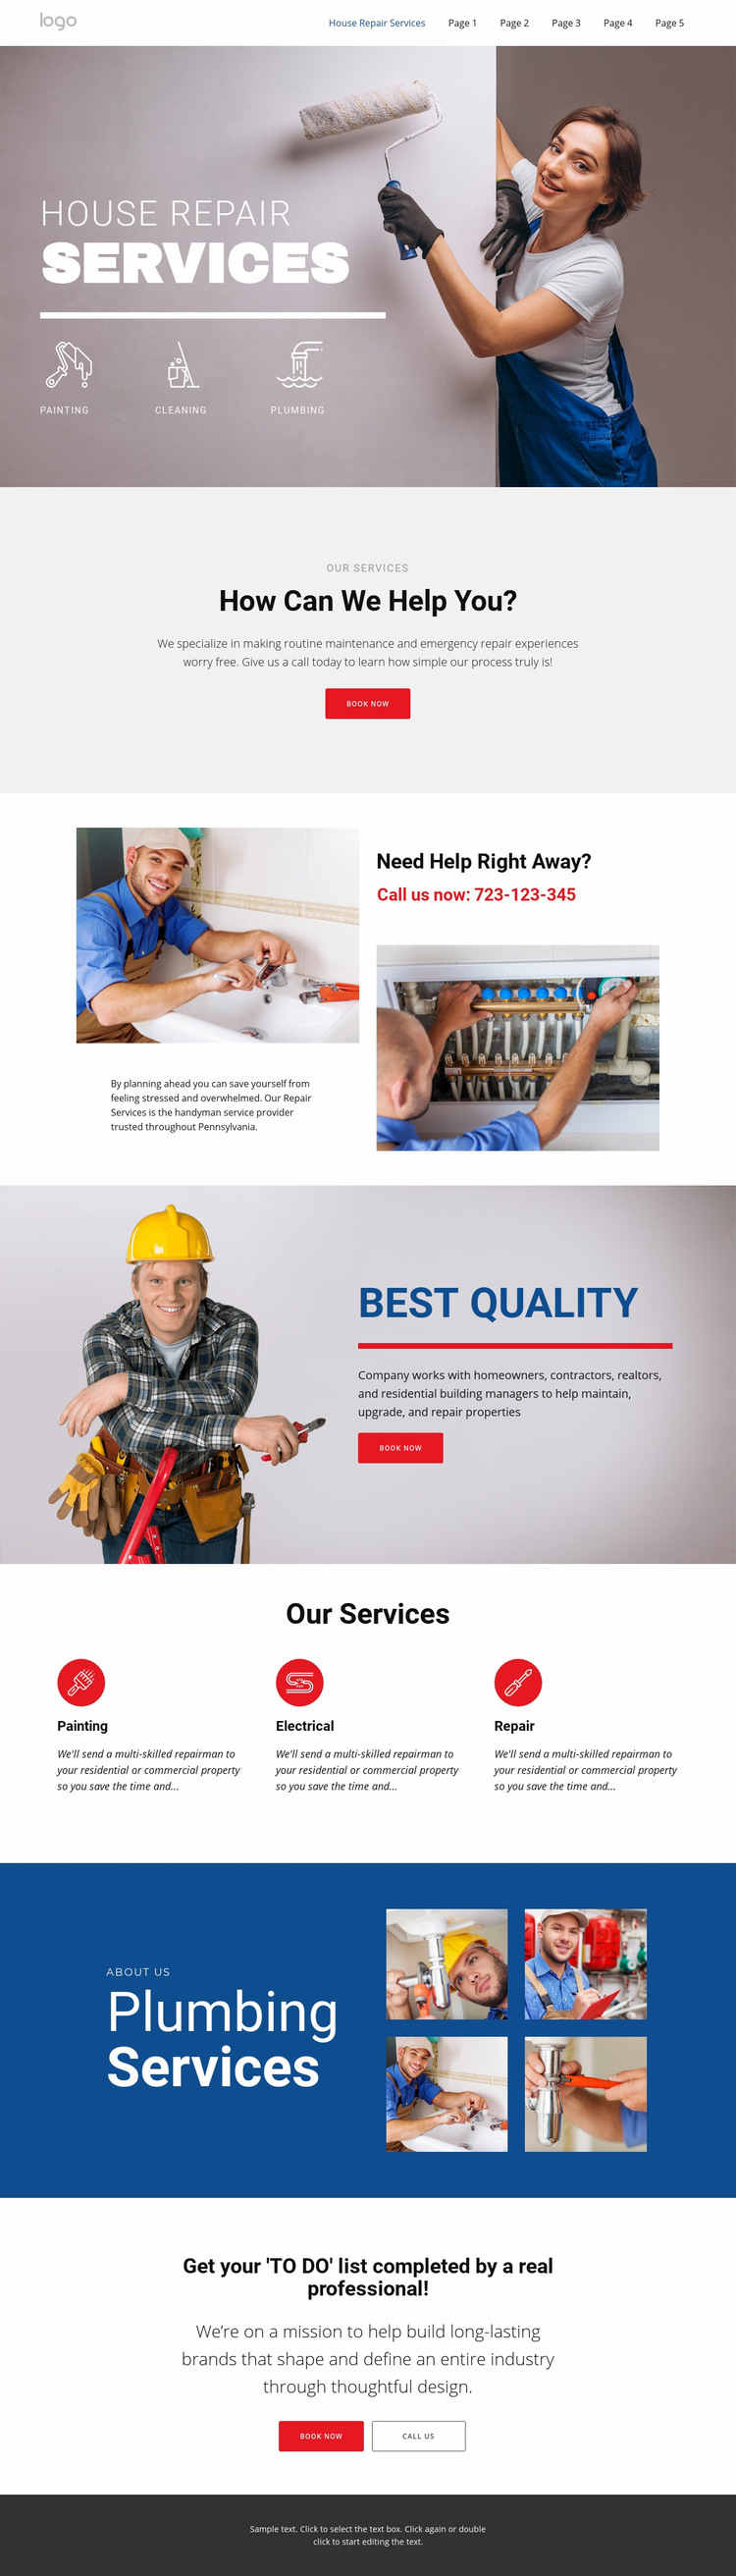 House repair and contruction Web Page Design